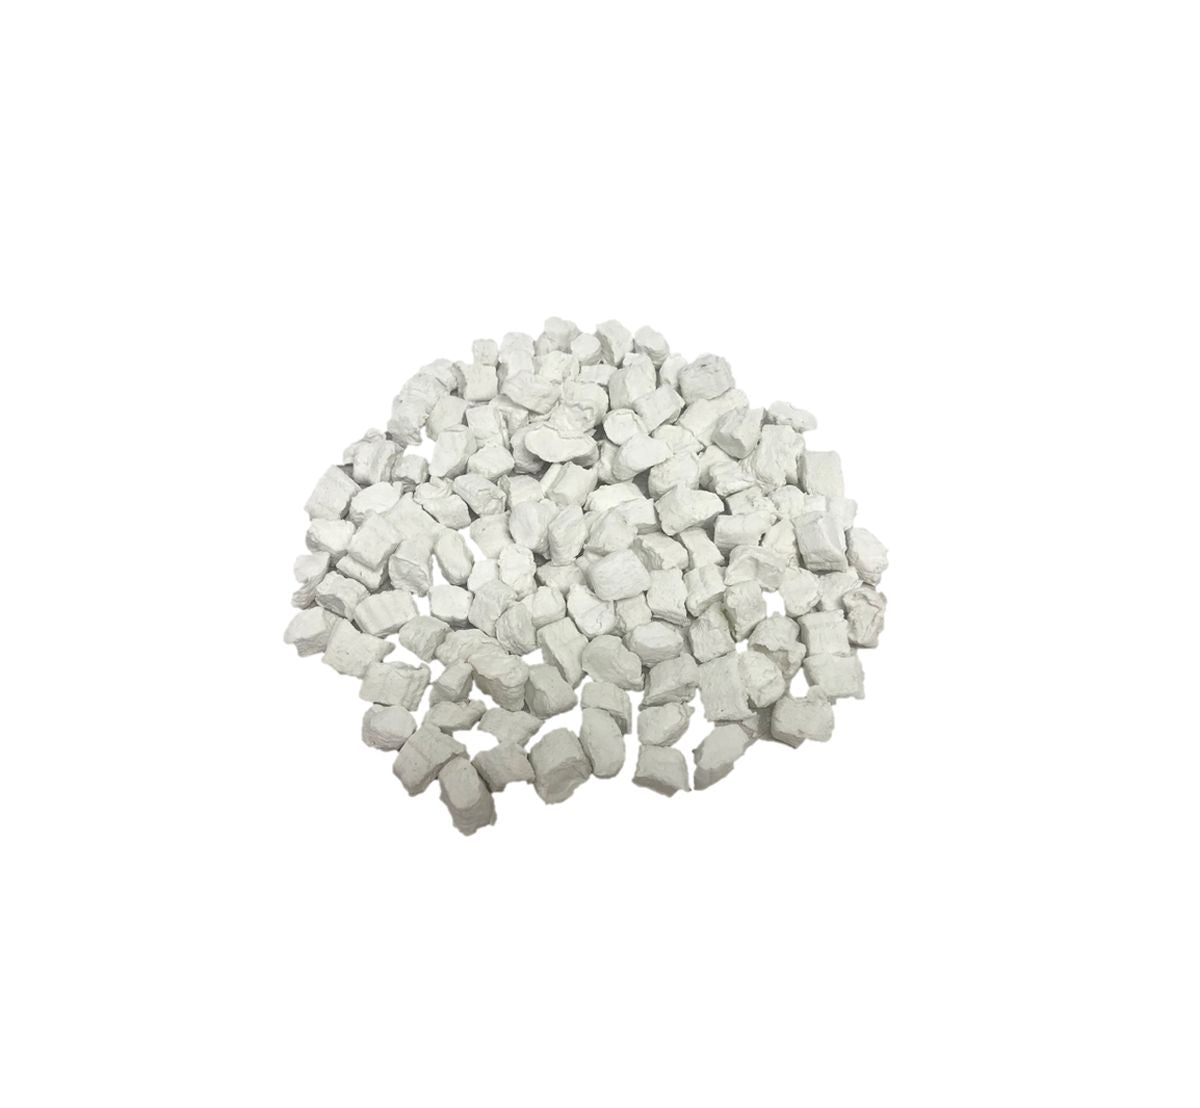 Enhance A Fire 0.44 Lb. Snow White Premium Decorative Embers for Indoor Vented Gas Logs and Fireplace